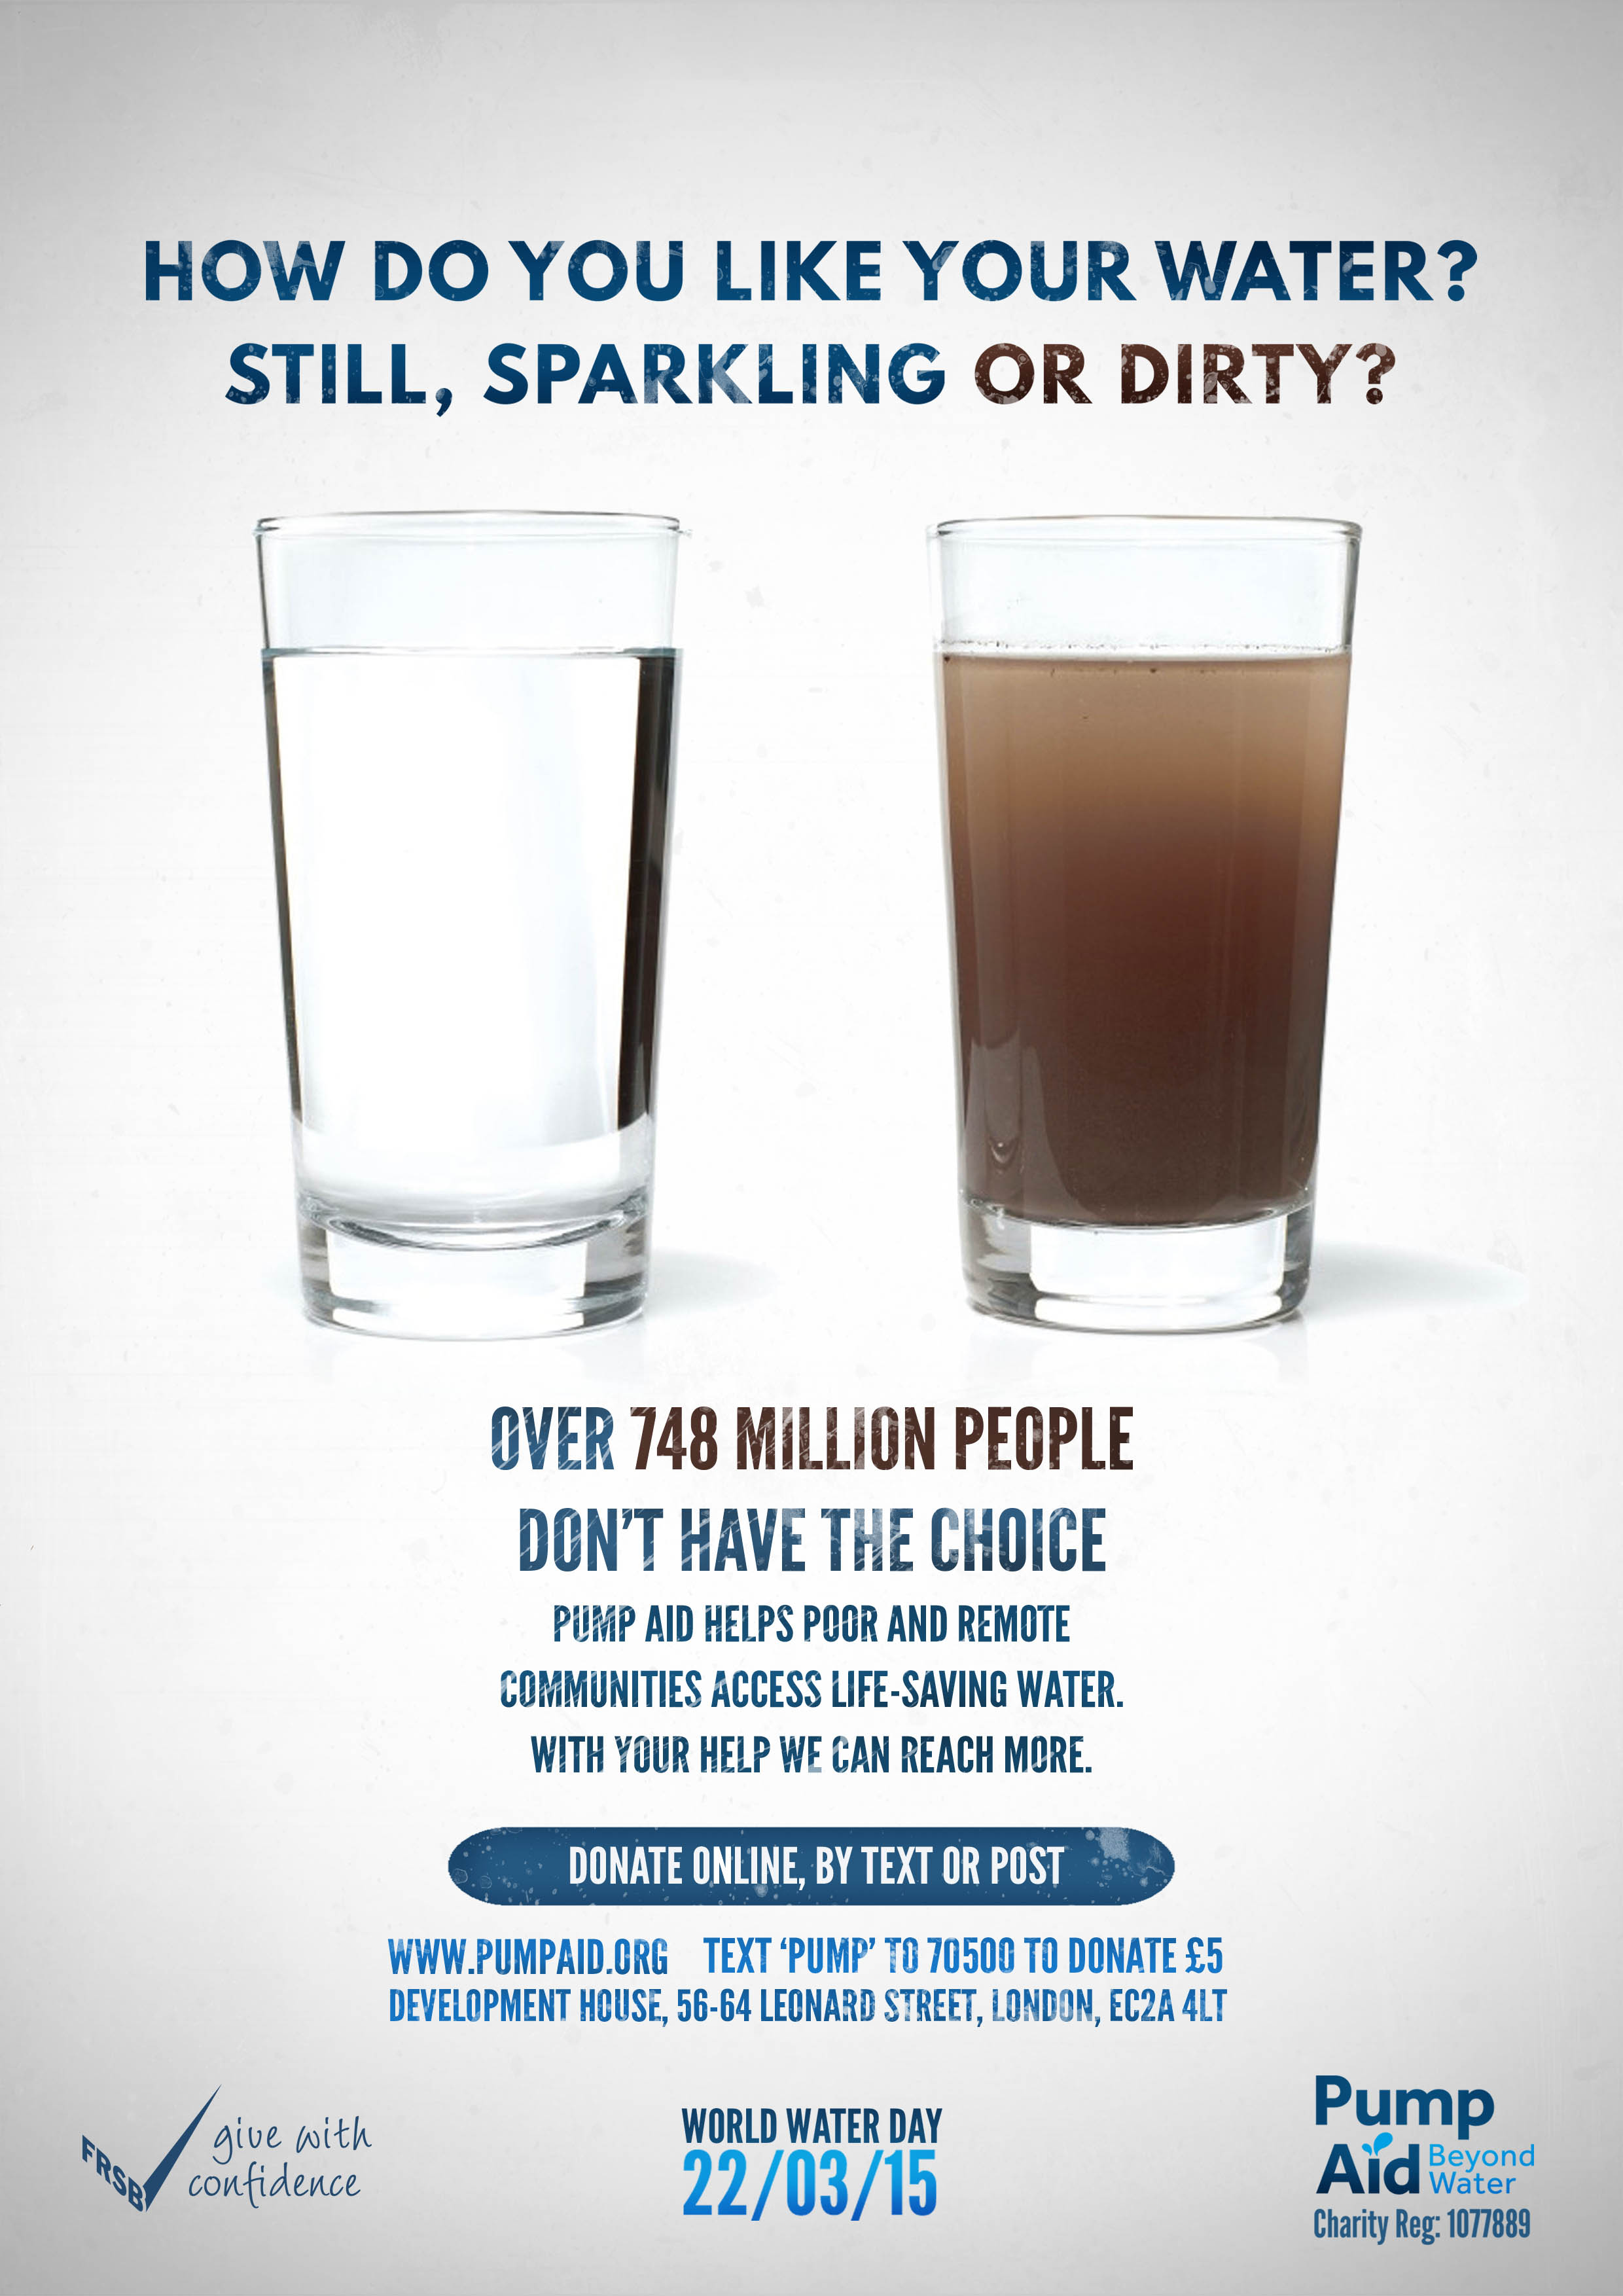 World water day poster